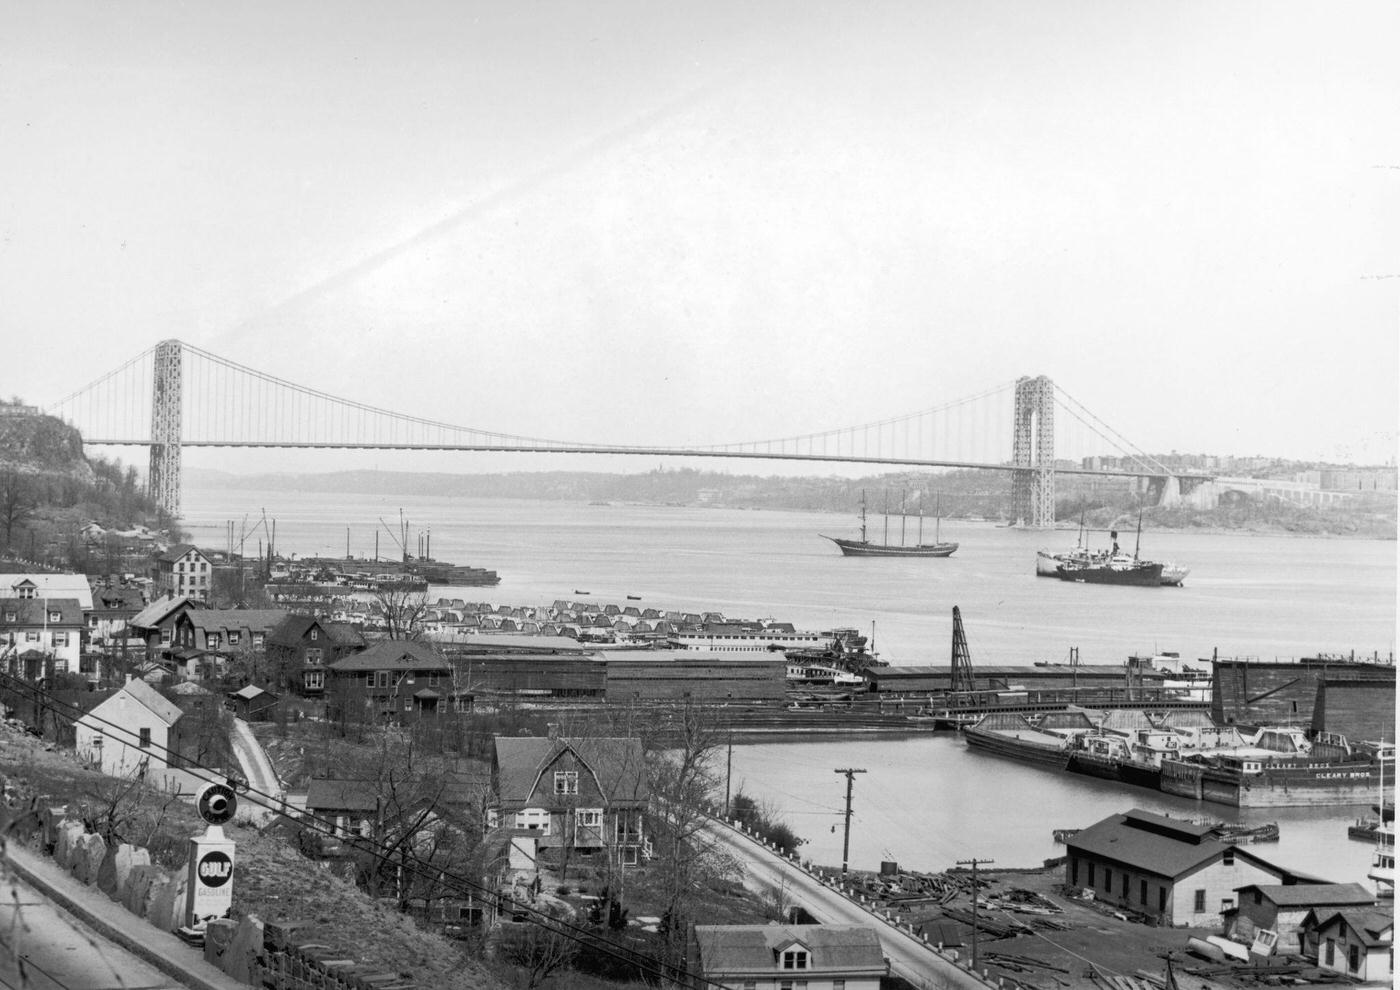 View Of The George Washington Bridge Looking South From Manhattan, 1930S